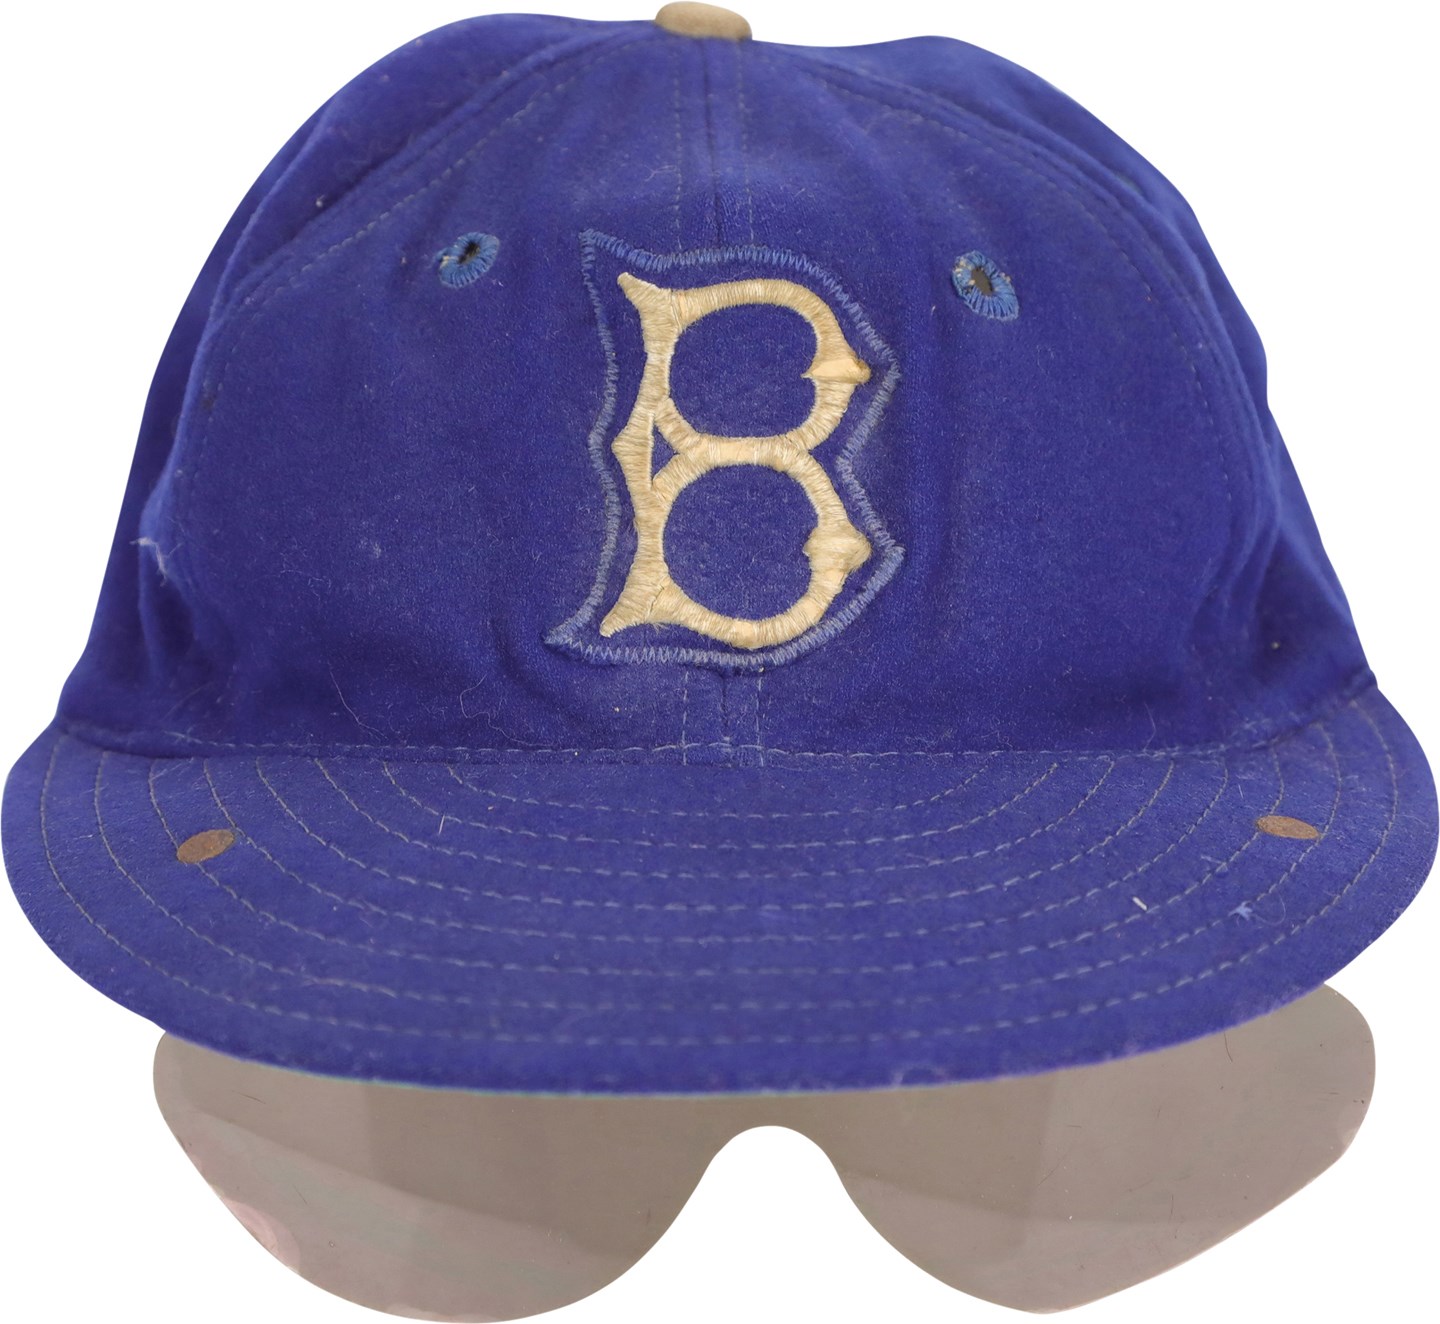 - Circa 1950 Brooklyn Dodgers Signed Game Worn Cap with Glasses Attributed to Pee Wee Reese